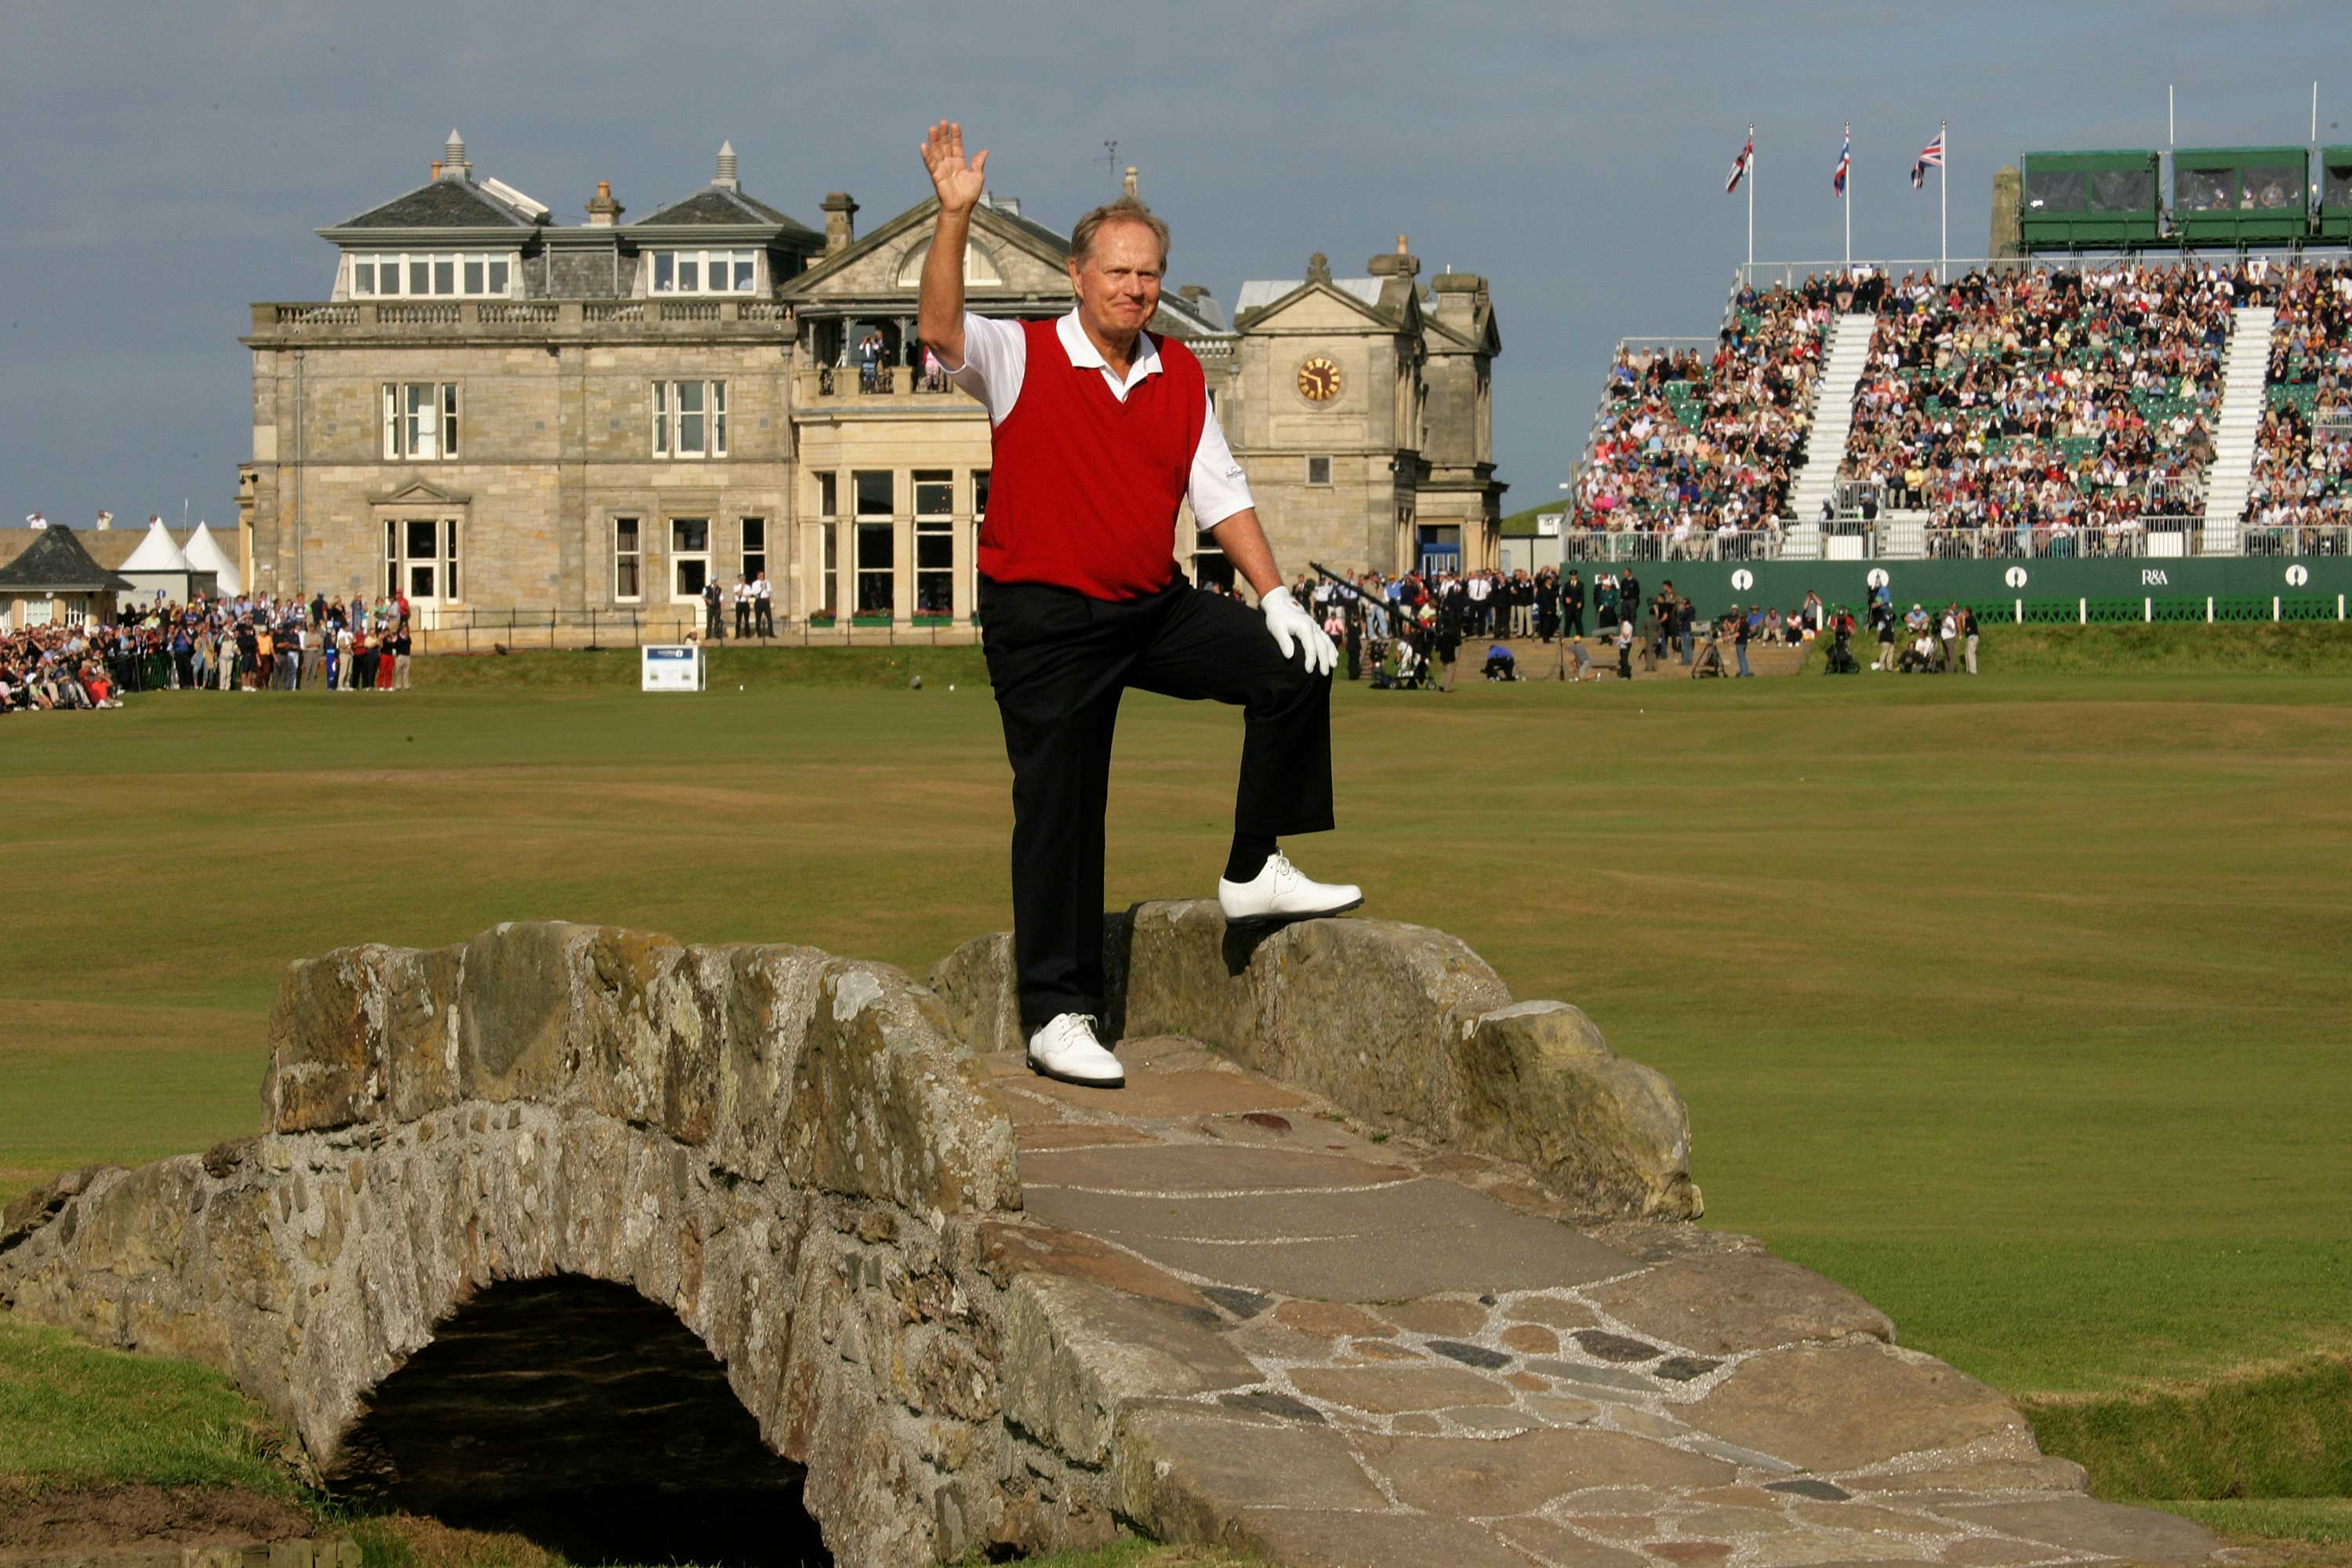 Jack Nicklaus bids farewell to the Open Championship in 2005 (Photo: Getty Images)